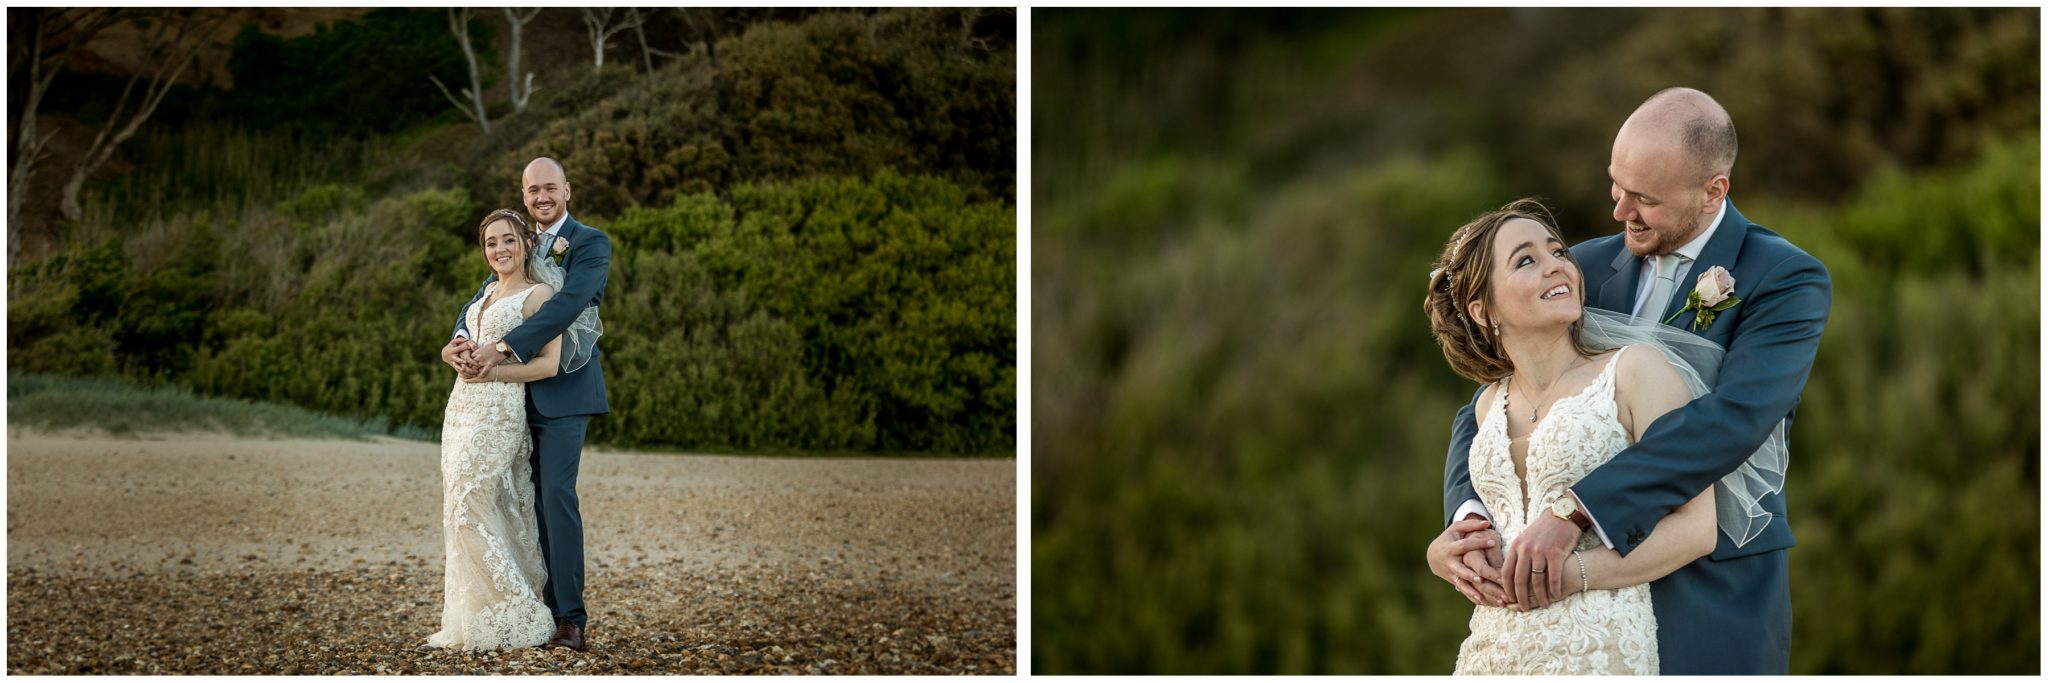 Colour portraits f bride and groom on Highcliffe Beach Hampshire New Forest